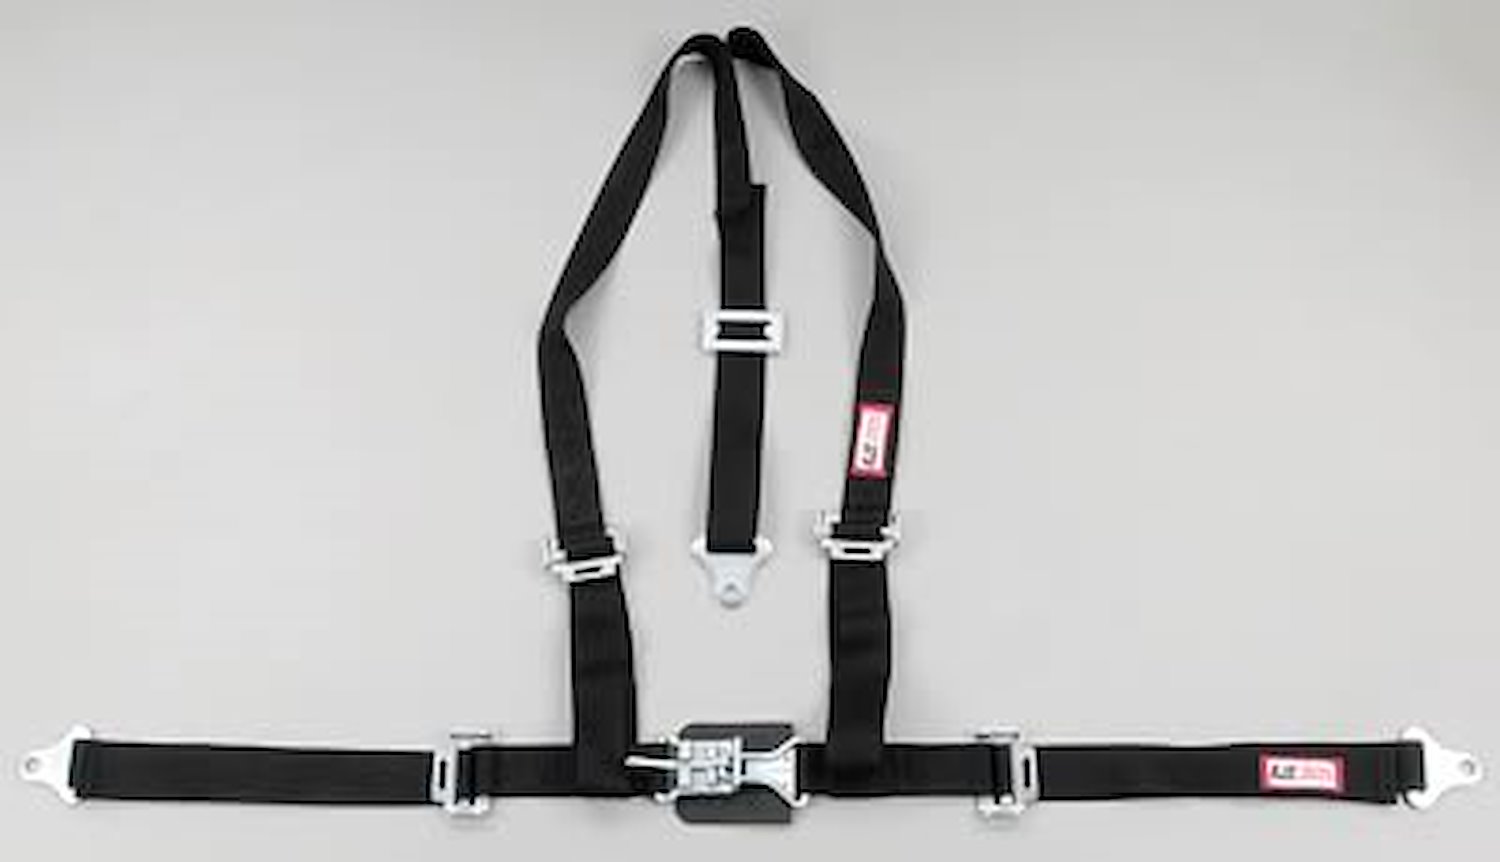 NON-SFI L&L HARNESS 3 PULL DOWN Lap Belt SEWN IN 2 Shoulder Harness V ROLL BAR Mount ALL WRAP ENDS GRAY